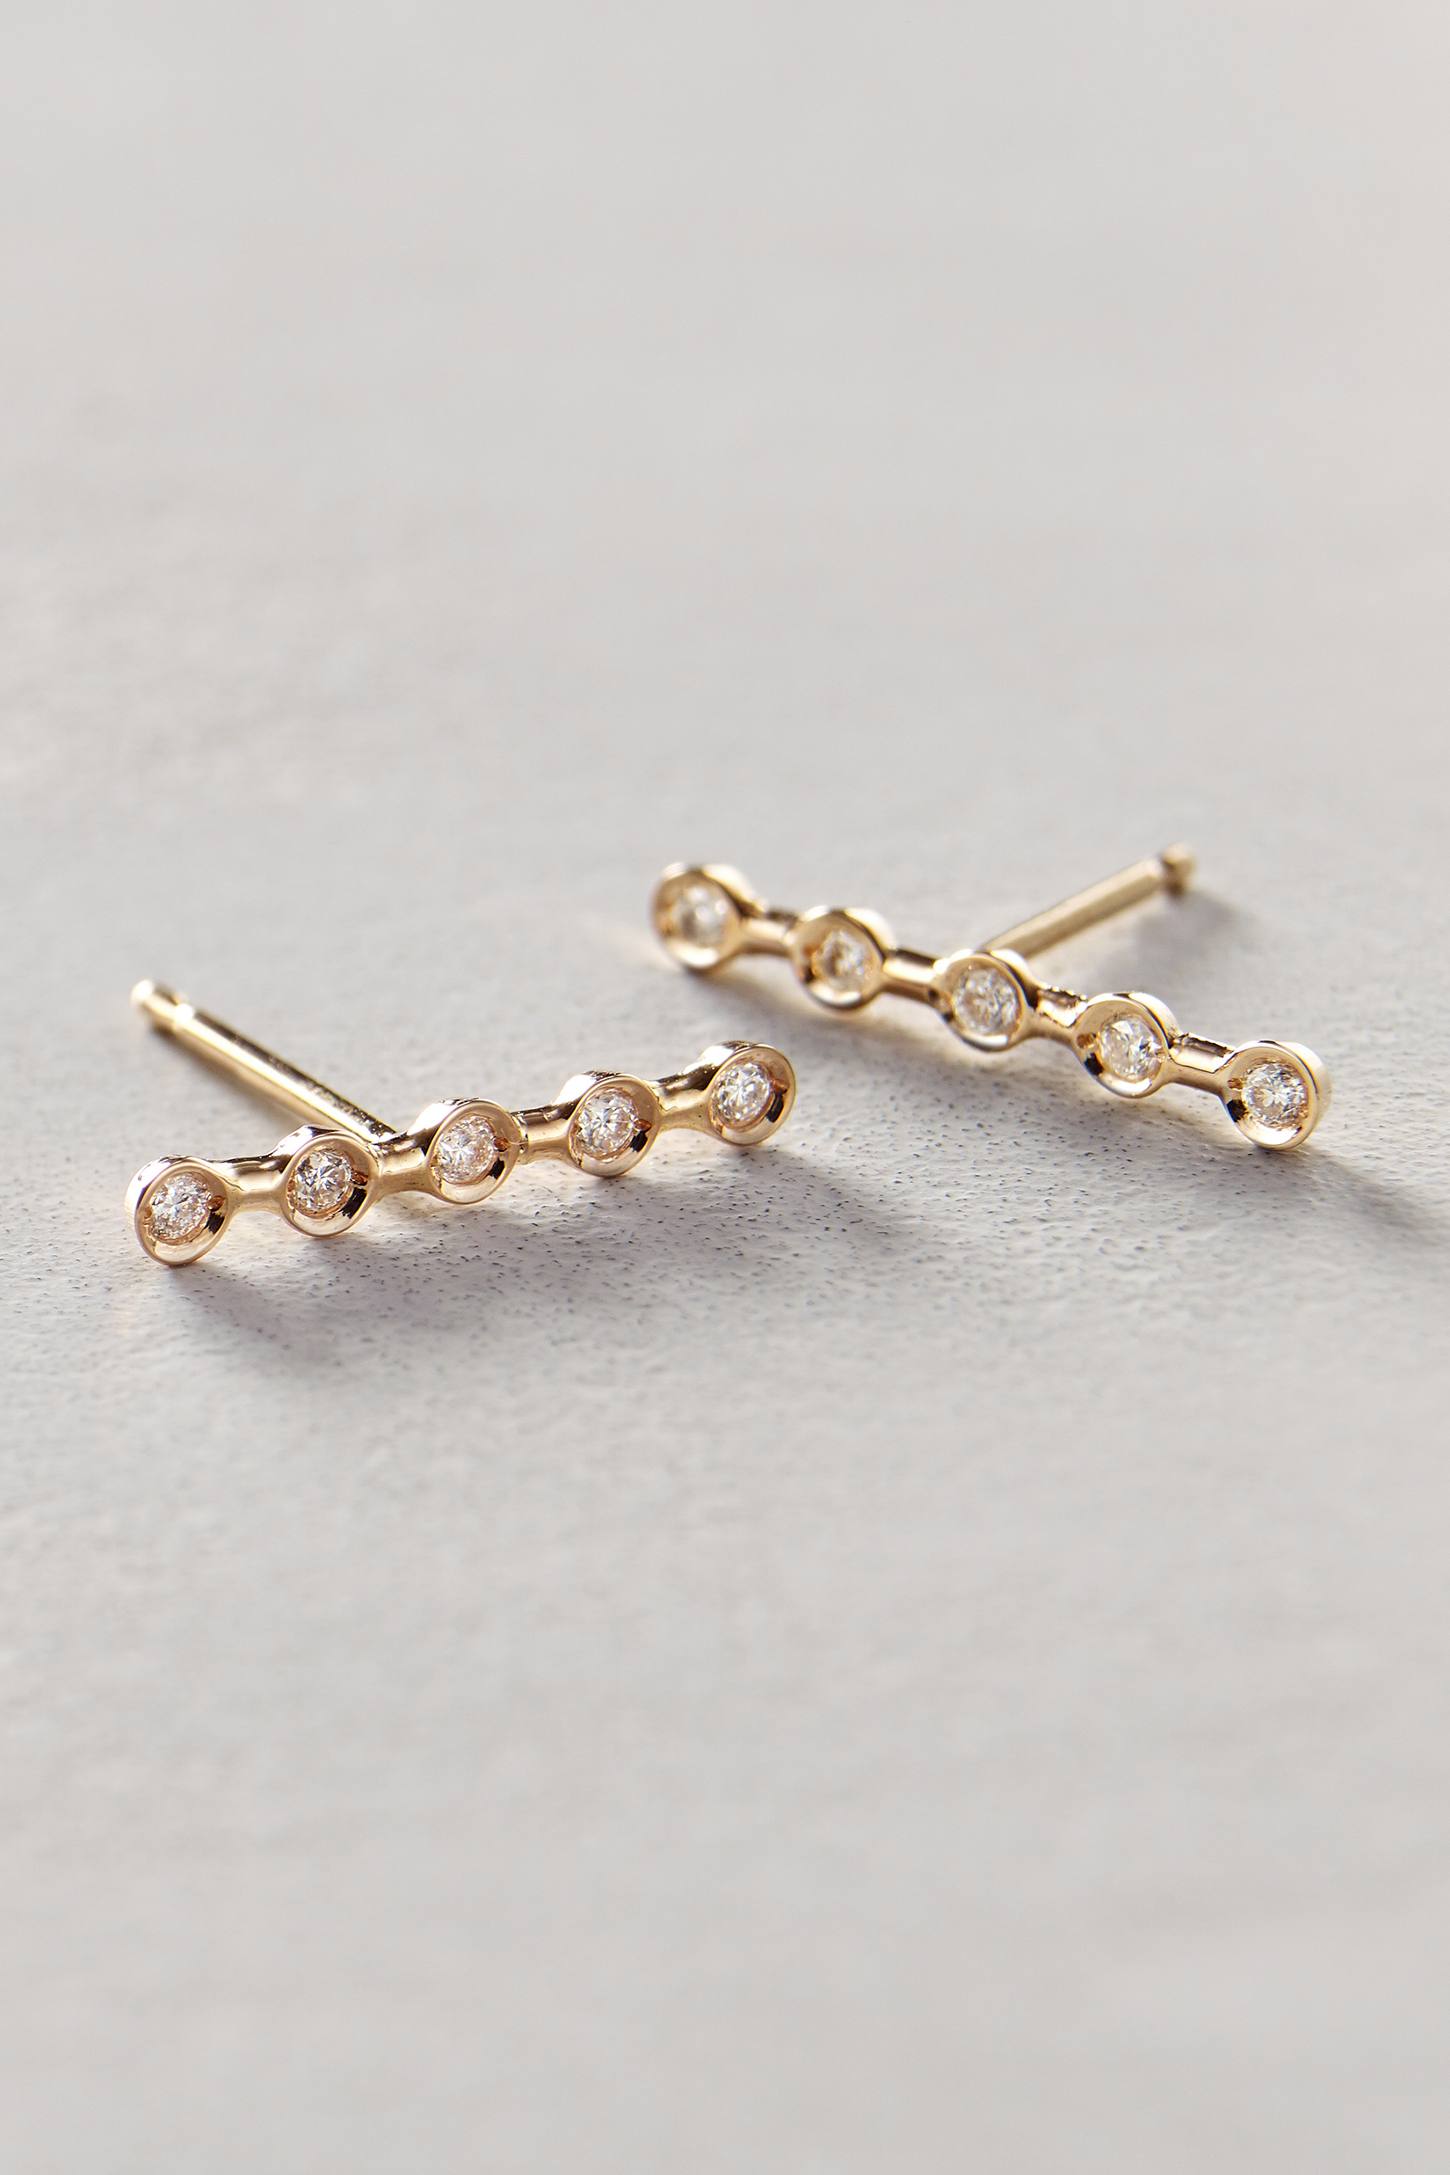 Ariel Gordon horizon earrings in 14K gold, <a href="http://www.anthropologie.com/anthro/product/35999184.jsp?cm_vc=SEARCH_RESULTS#/">$558.60</a>.